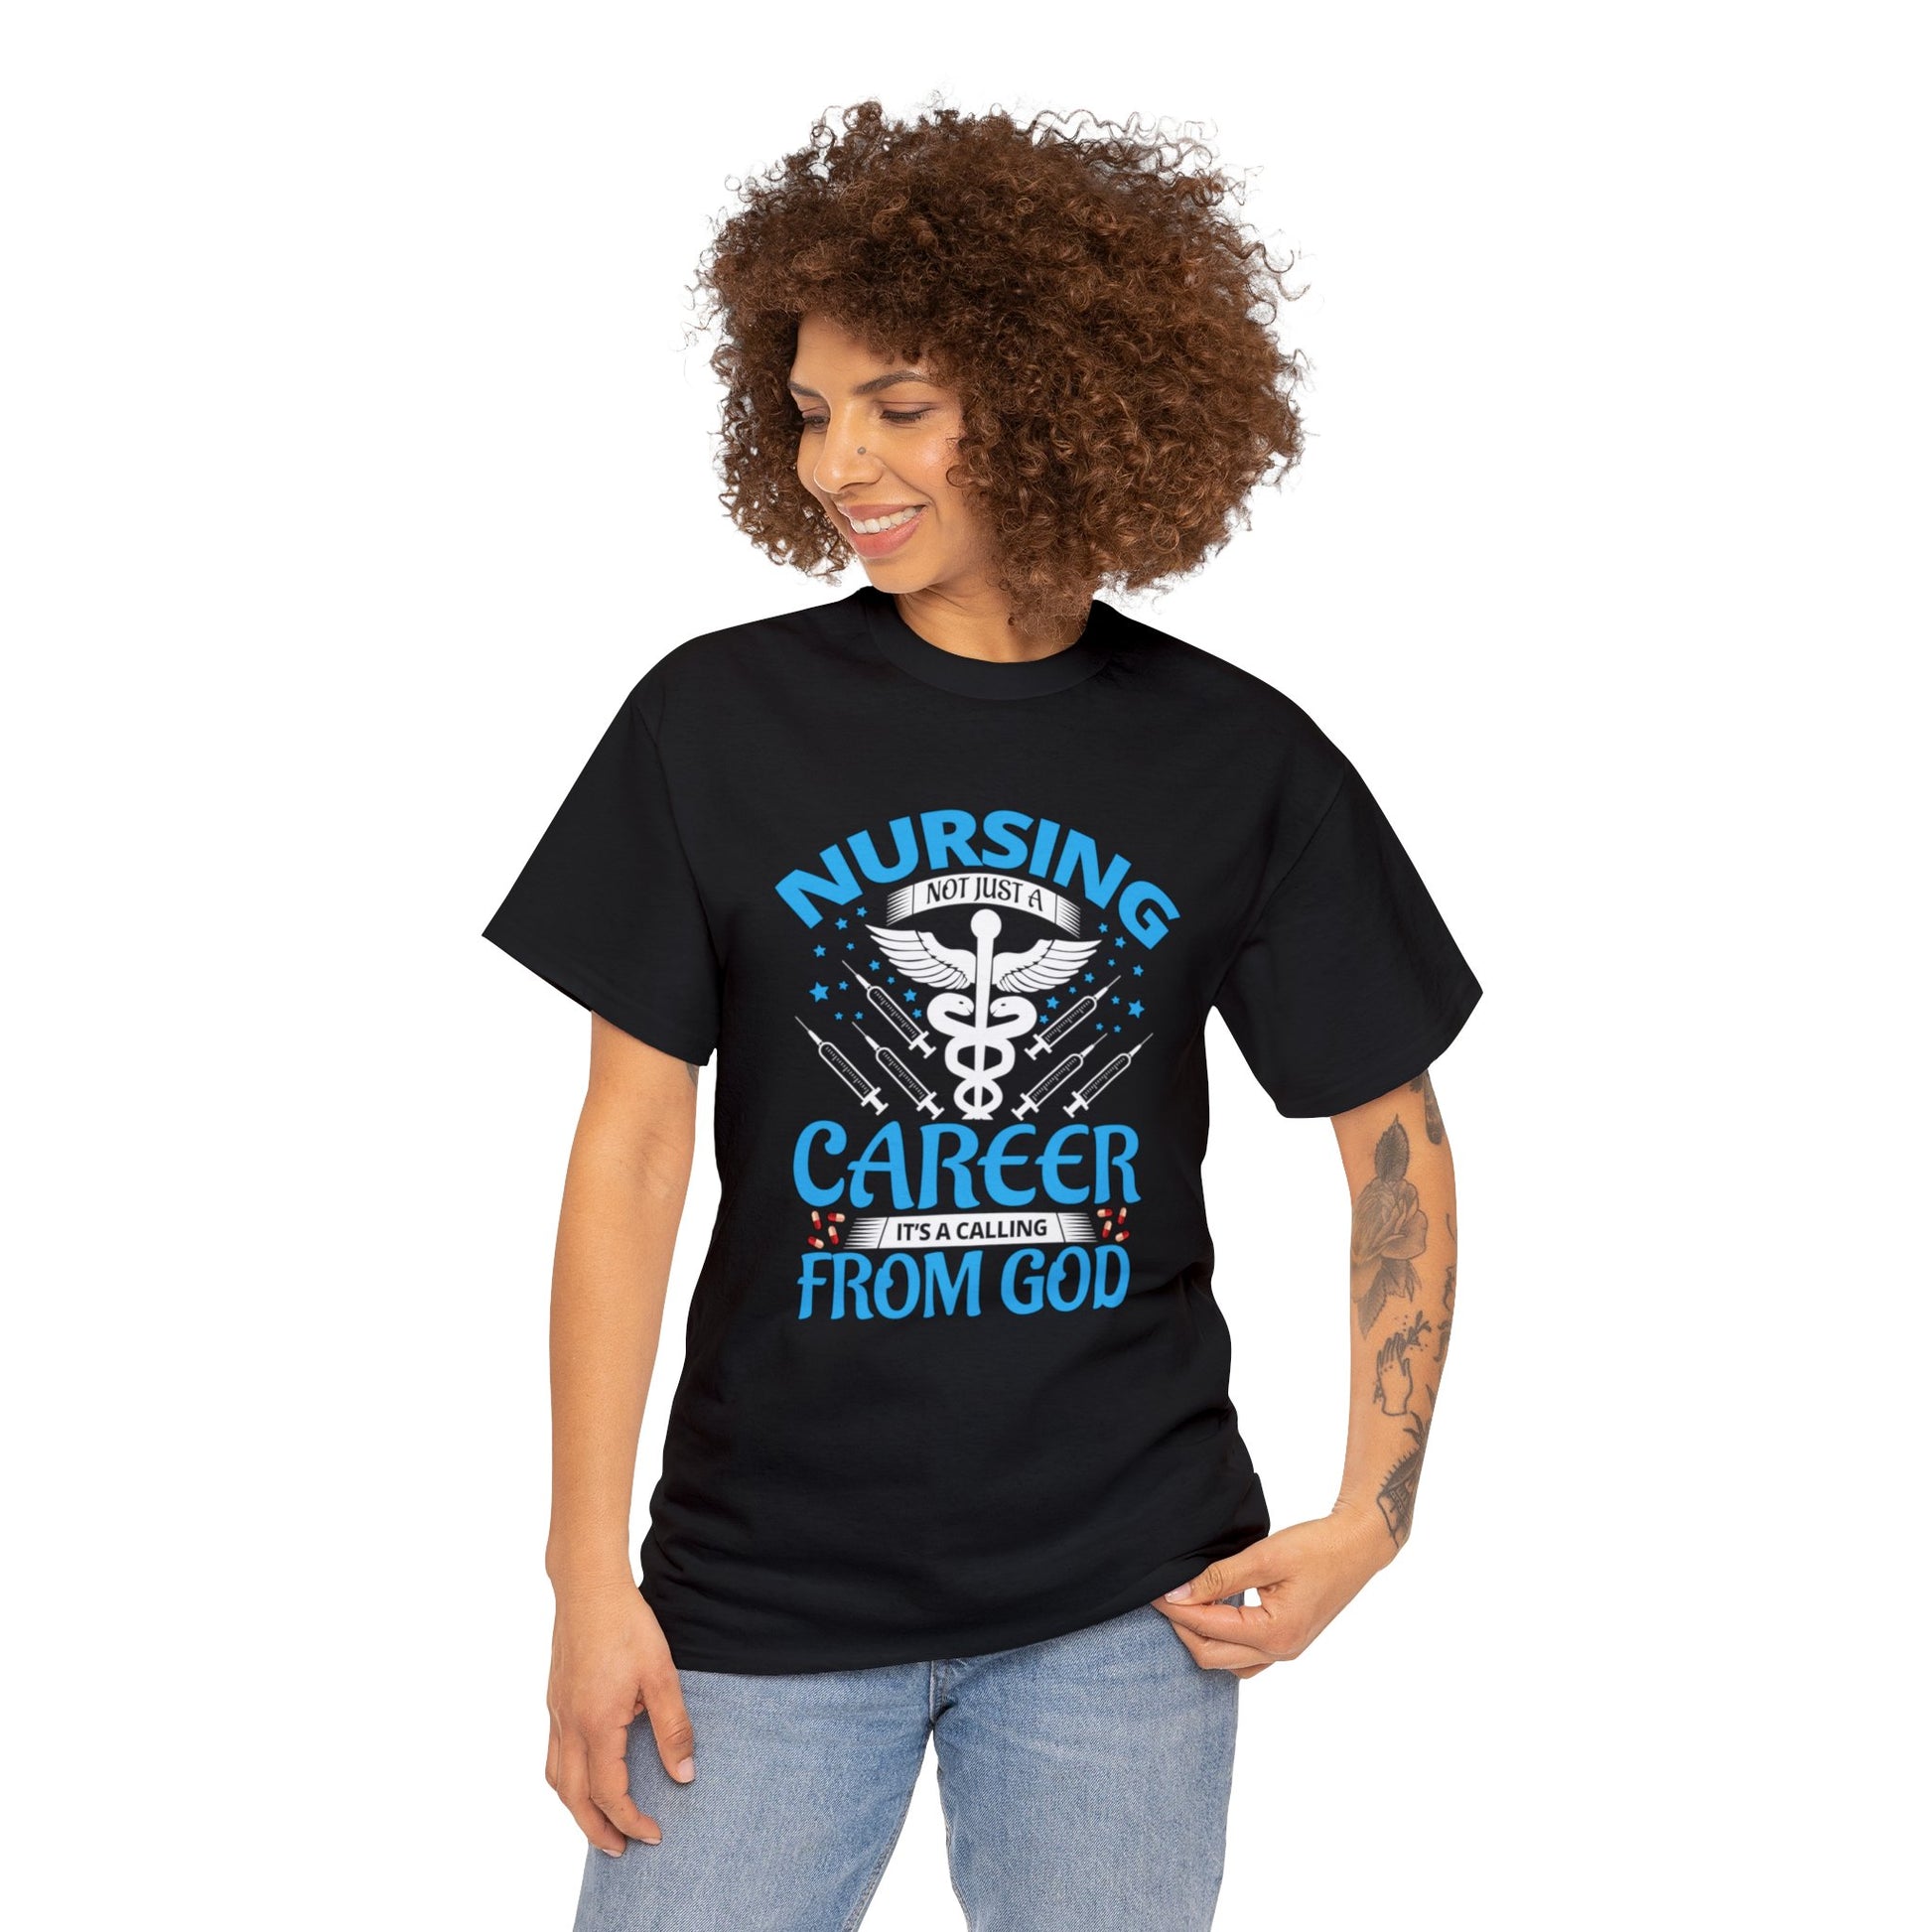 "Nursing Is Not Just A Career" T-Shirt - Weave Got Gifts - Unique Gifts You Won’t Find Anywhere Else!